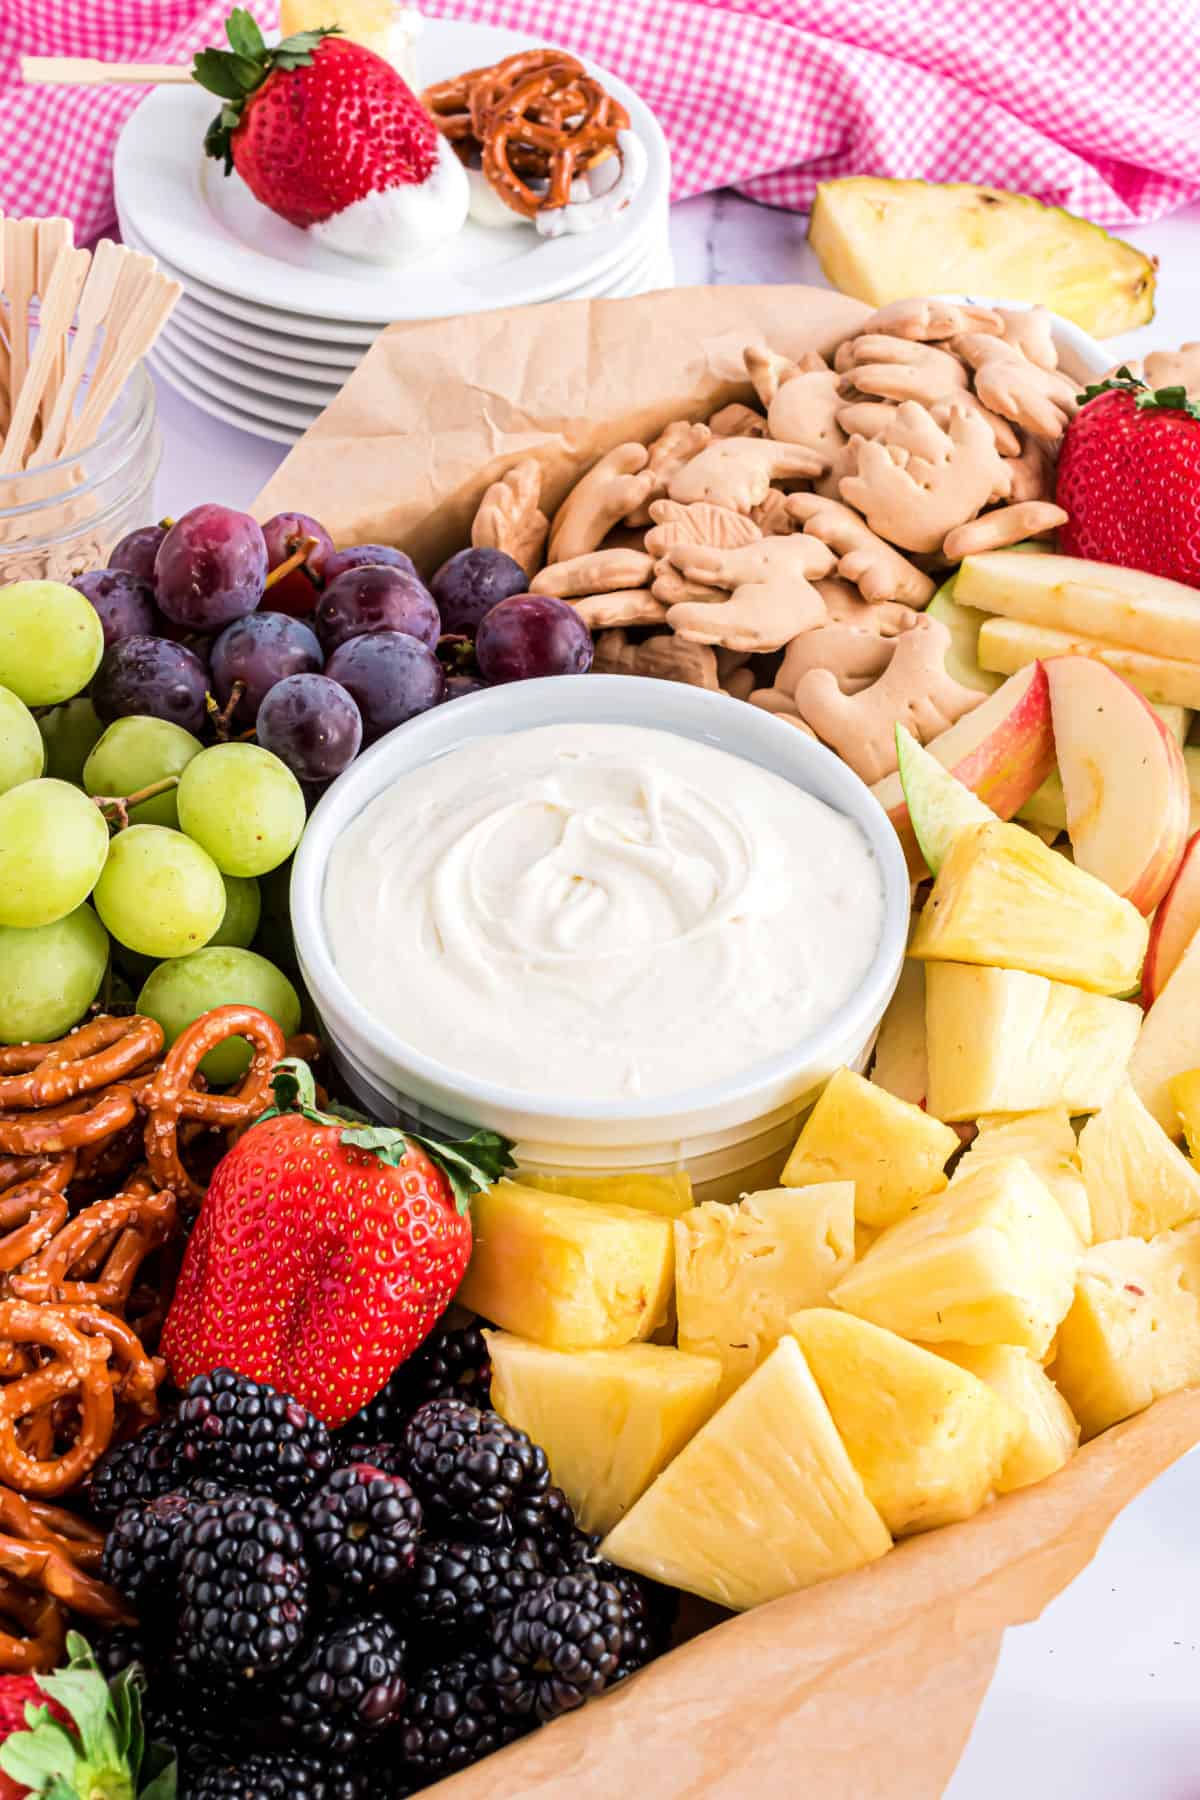 Cream cheese fruit dip served with fresh fruits, cookies, and pretzels on a wooden serving tray.